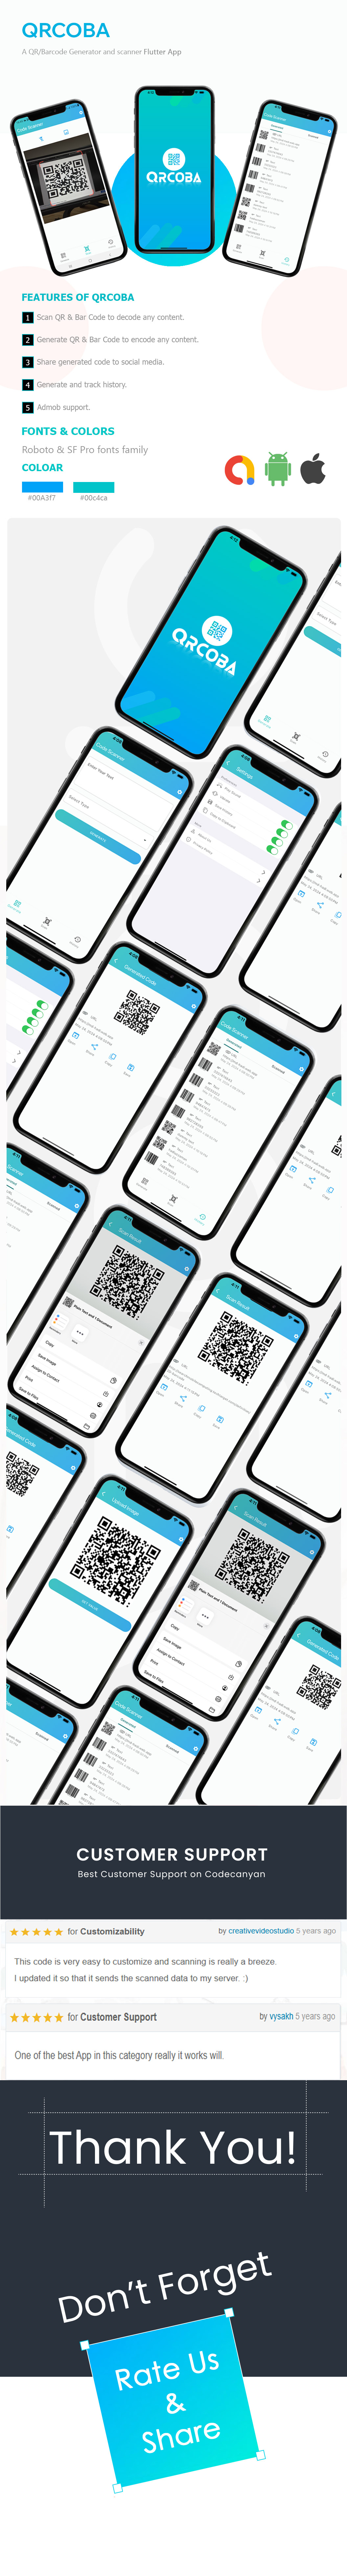 QRcoba: Simple QR & Barcode Scanner App for Android and iOS - 4